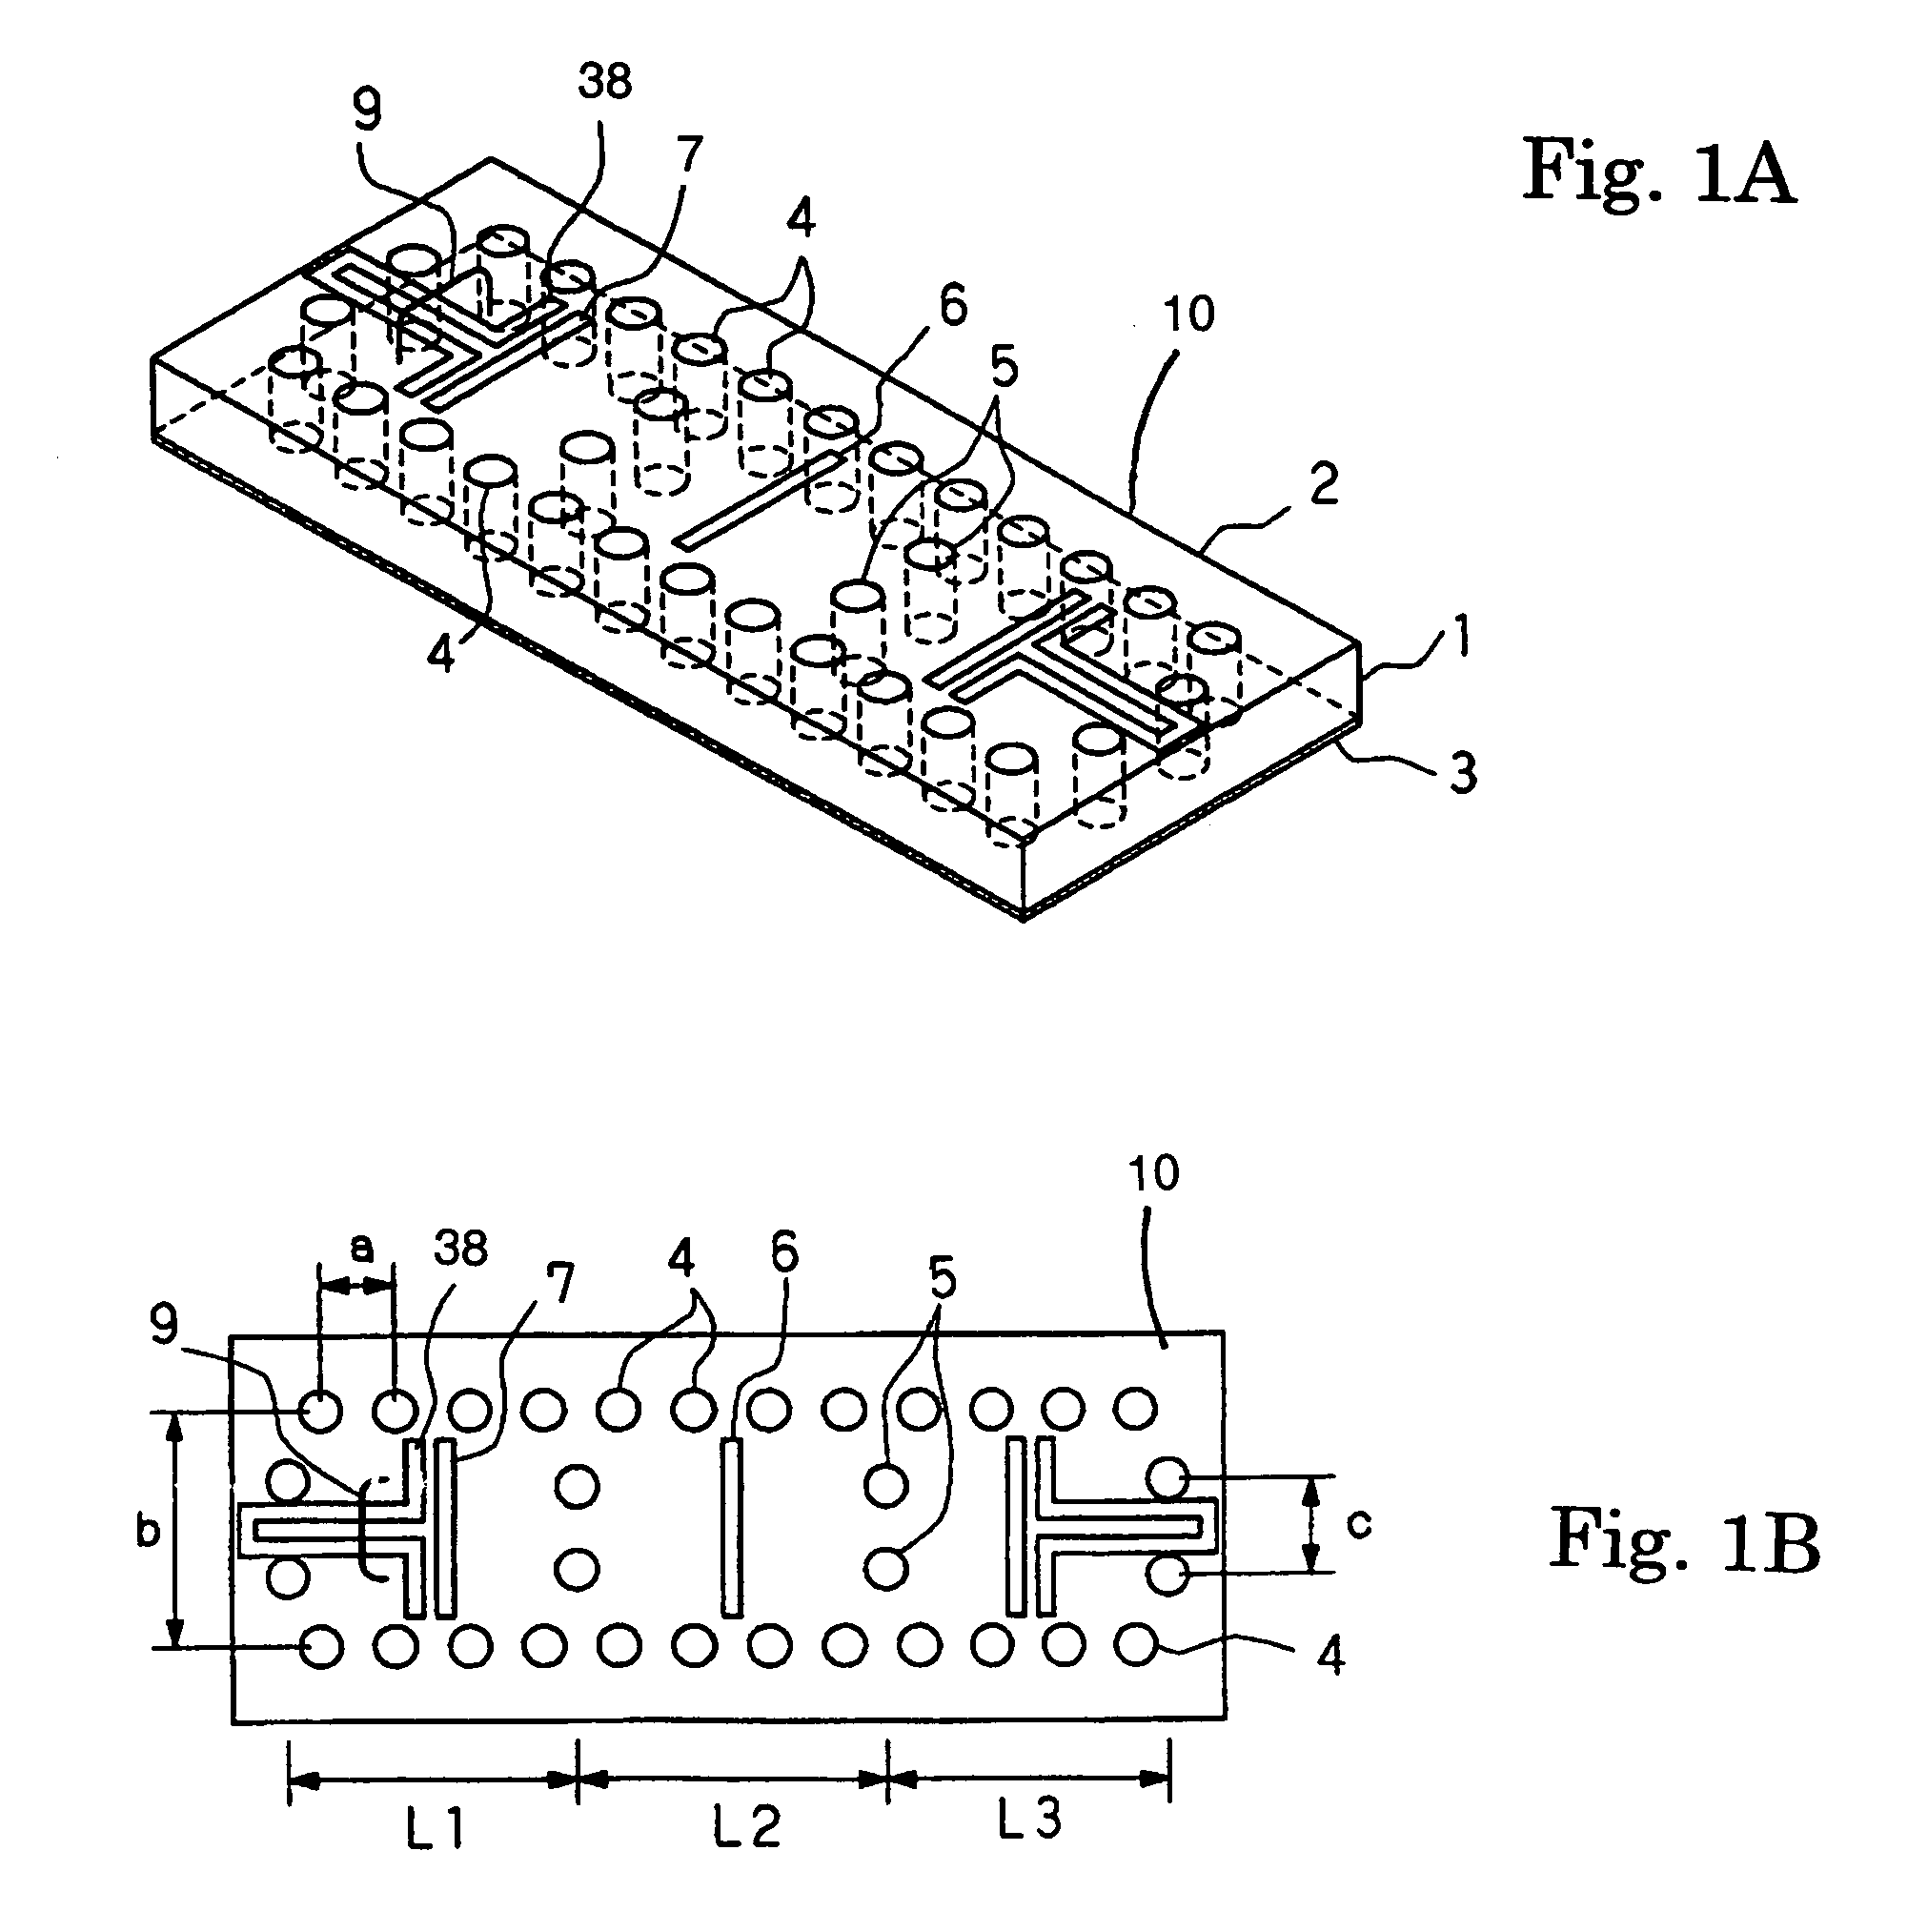 Dielectric waveguide filter with inductive windows and coplanar line coupling